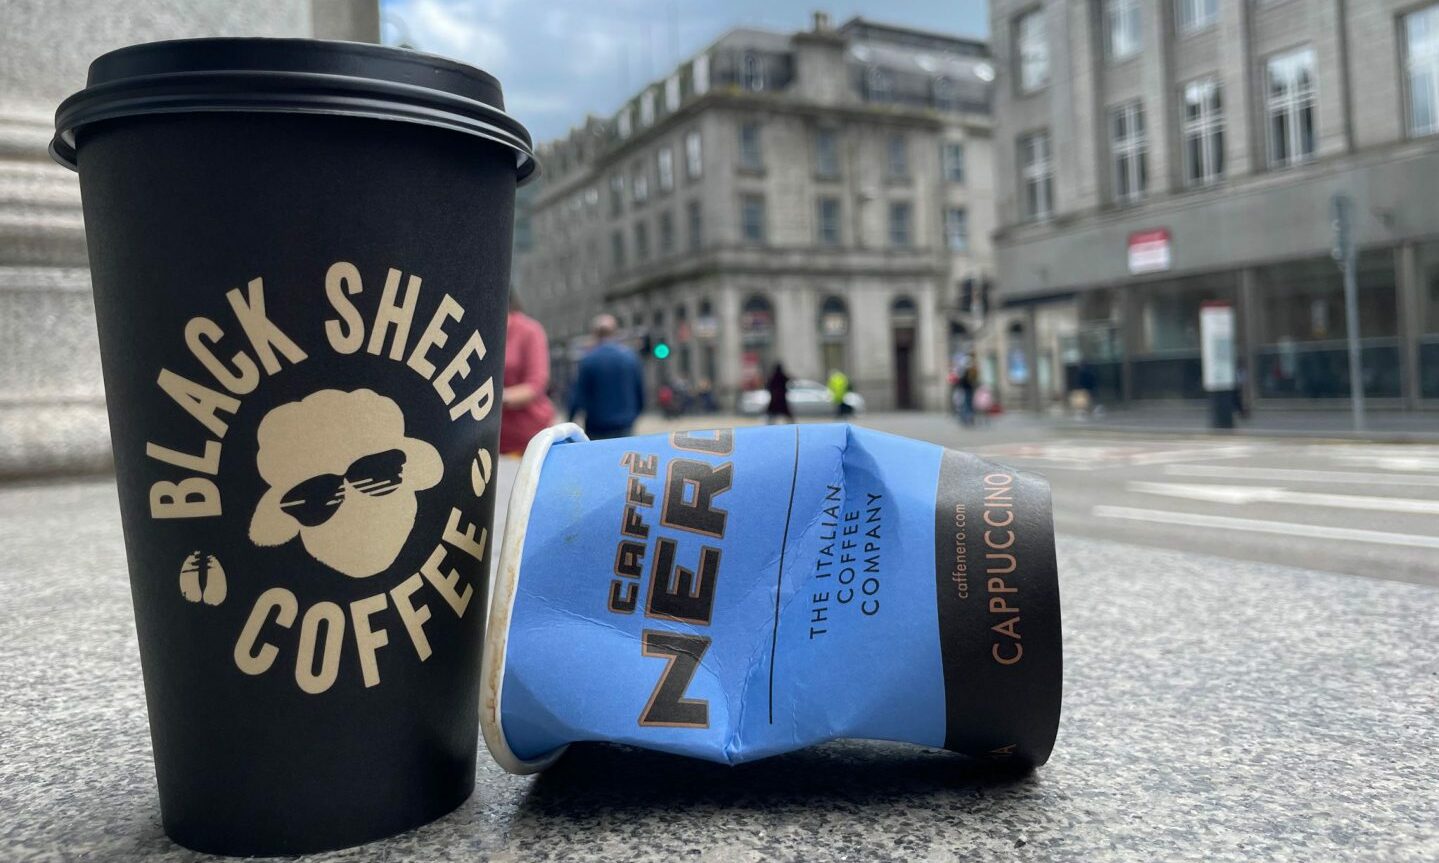 A black sheep coffee to-go cup next to a crumpled Caffe Nero to-go cup